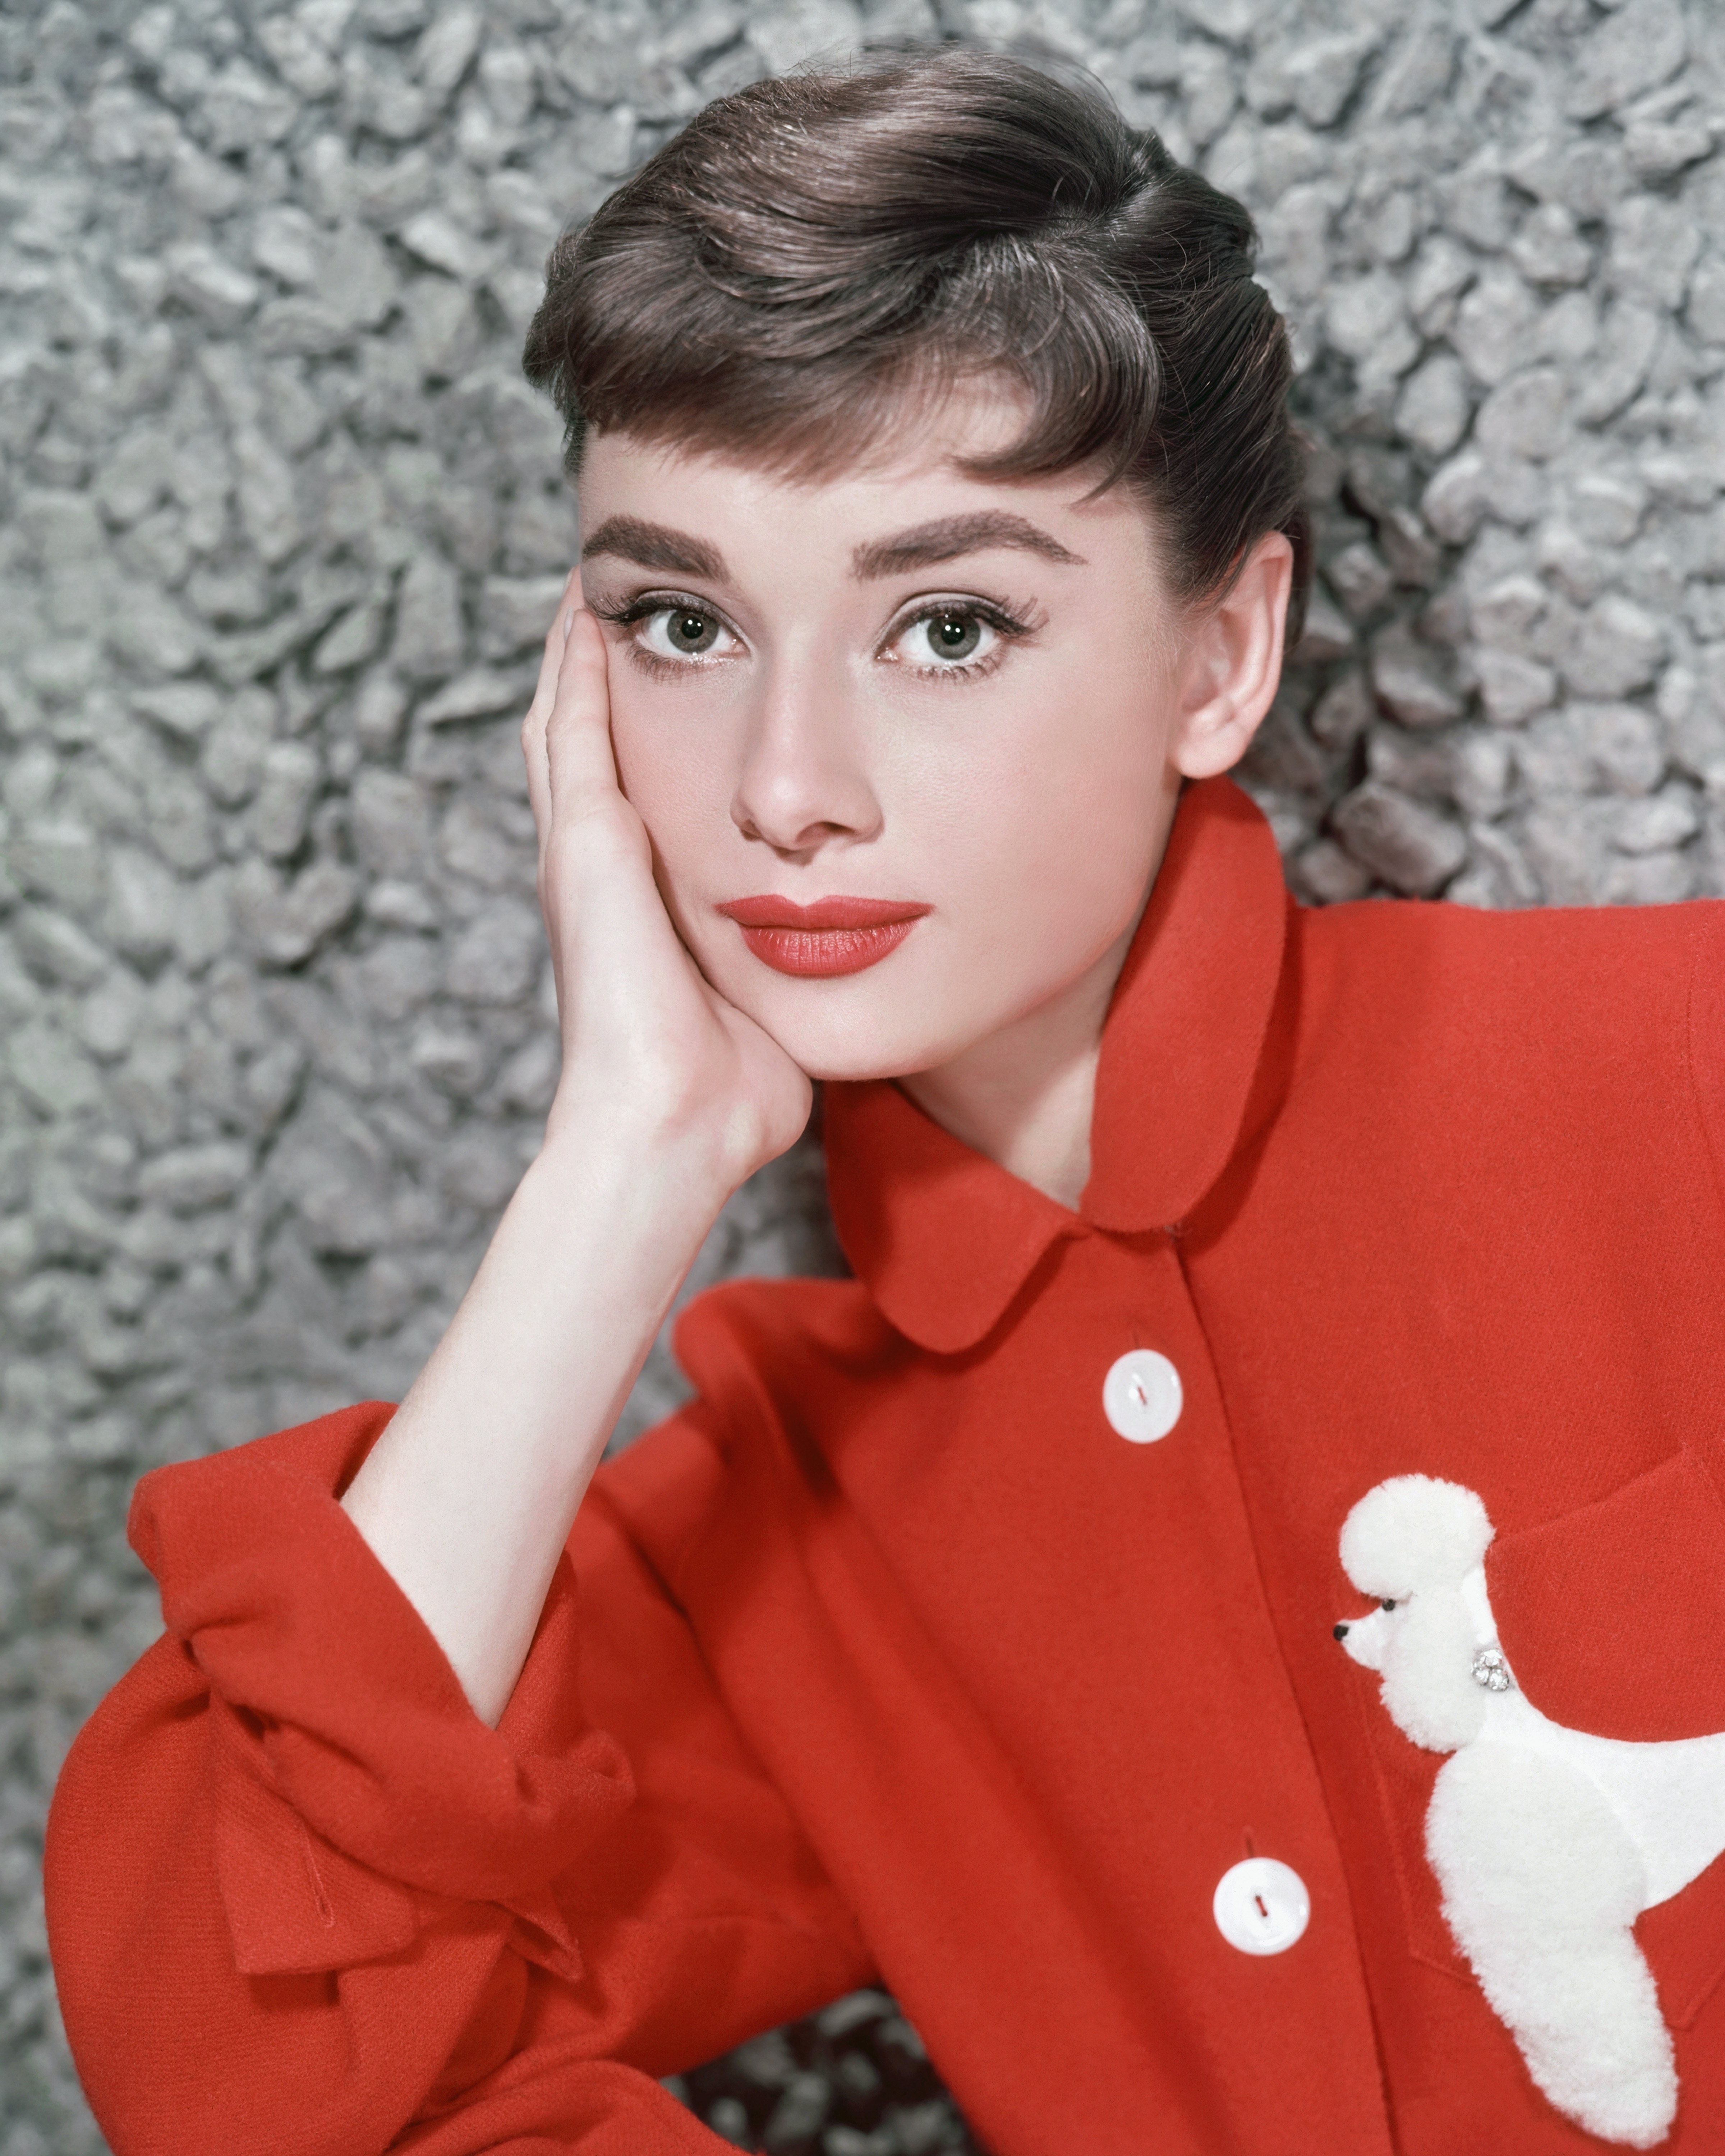 Actress Audrey Hepburn poses for a publicity still circa 1957. | Source: Getty Images